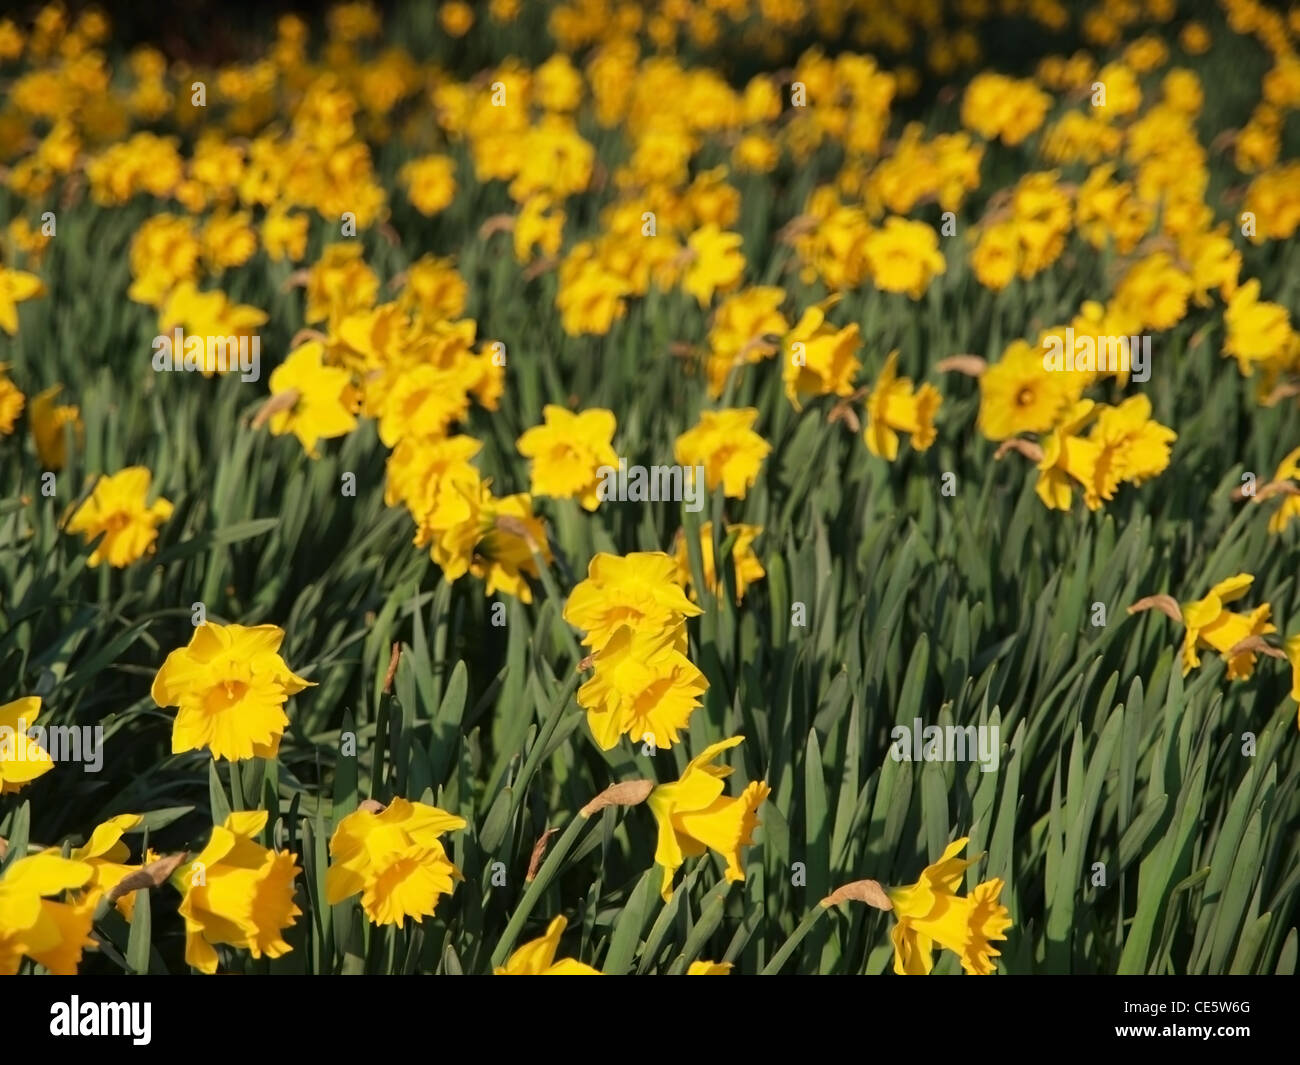 A host of golden daffodils. Stock Photo